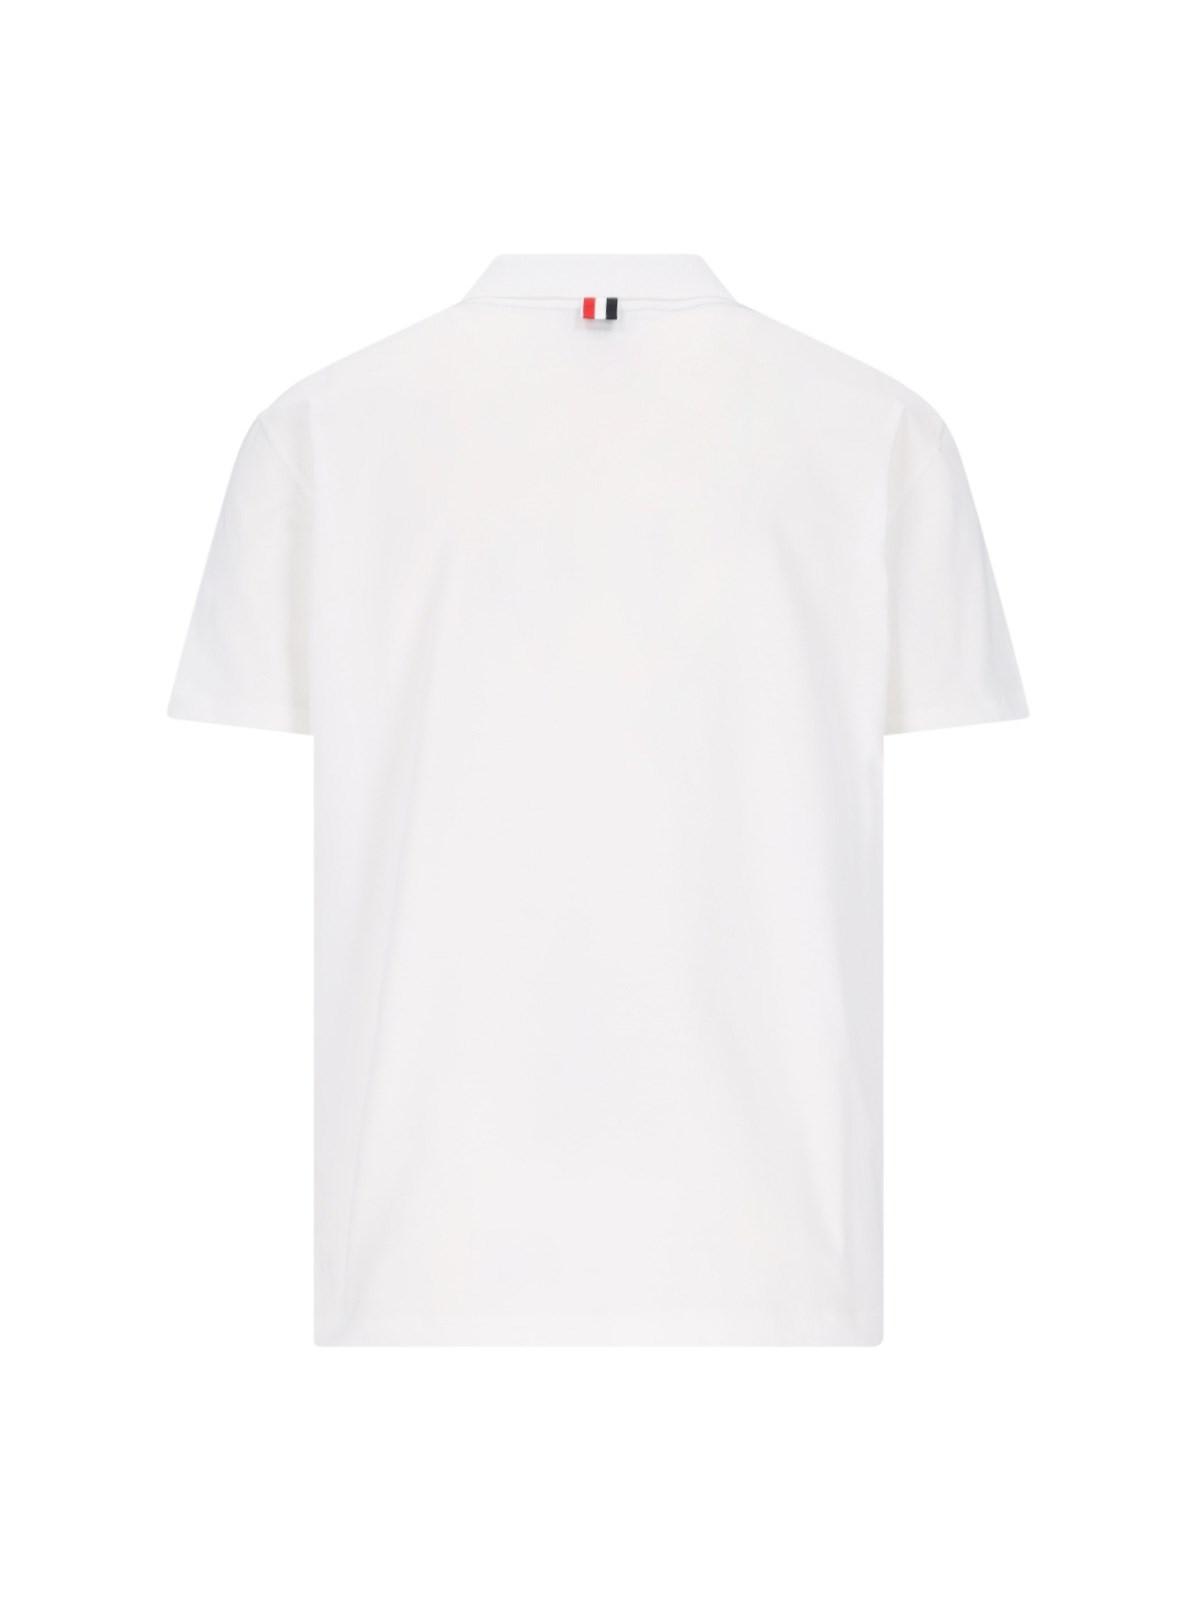 Shop Thom Browne Color Block Polo Shirt In Clear Blue